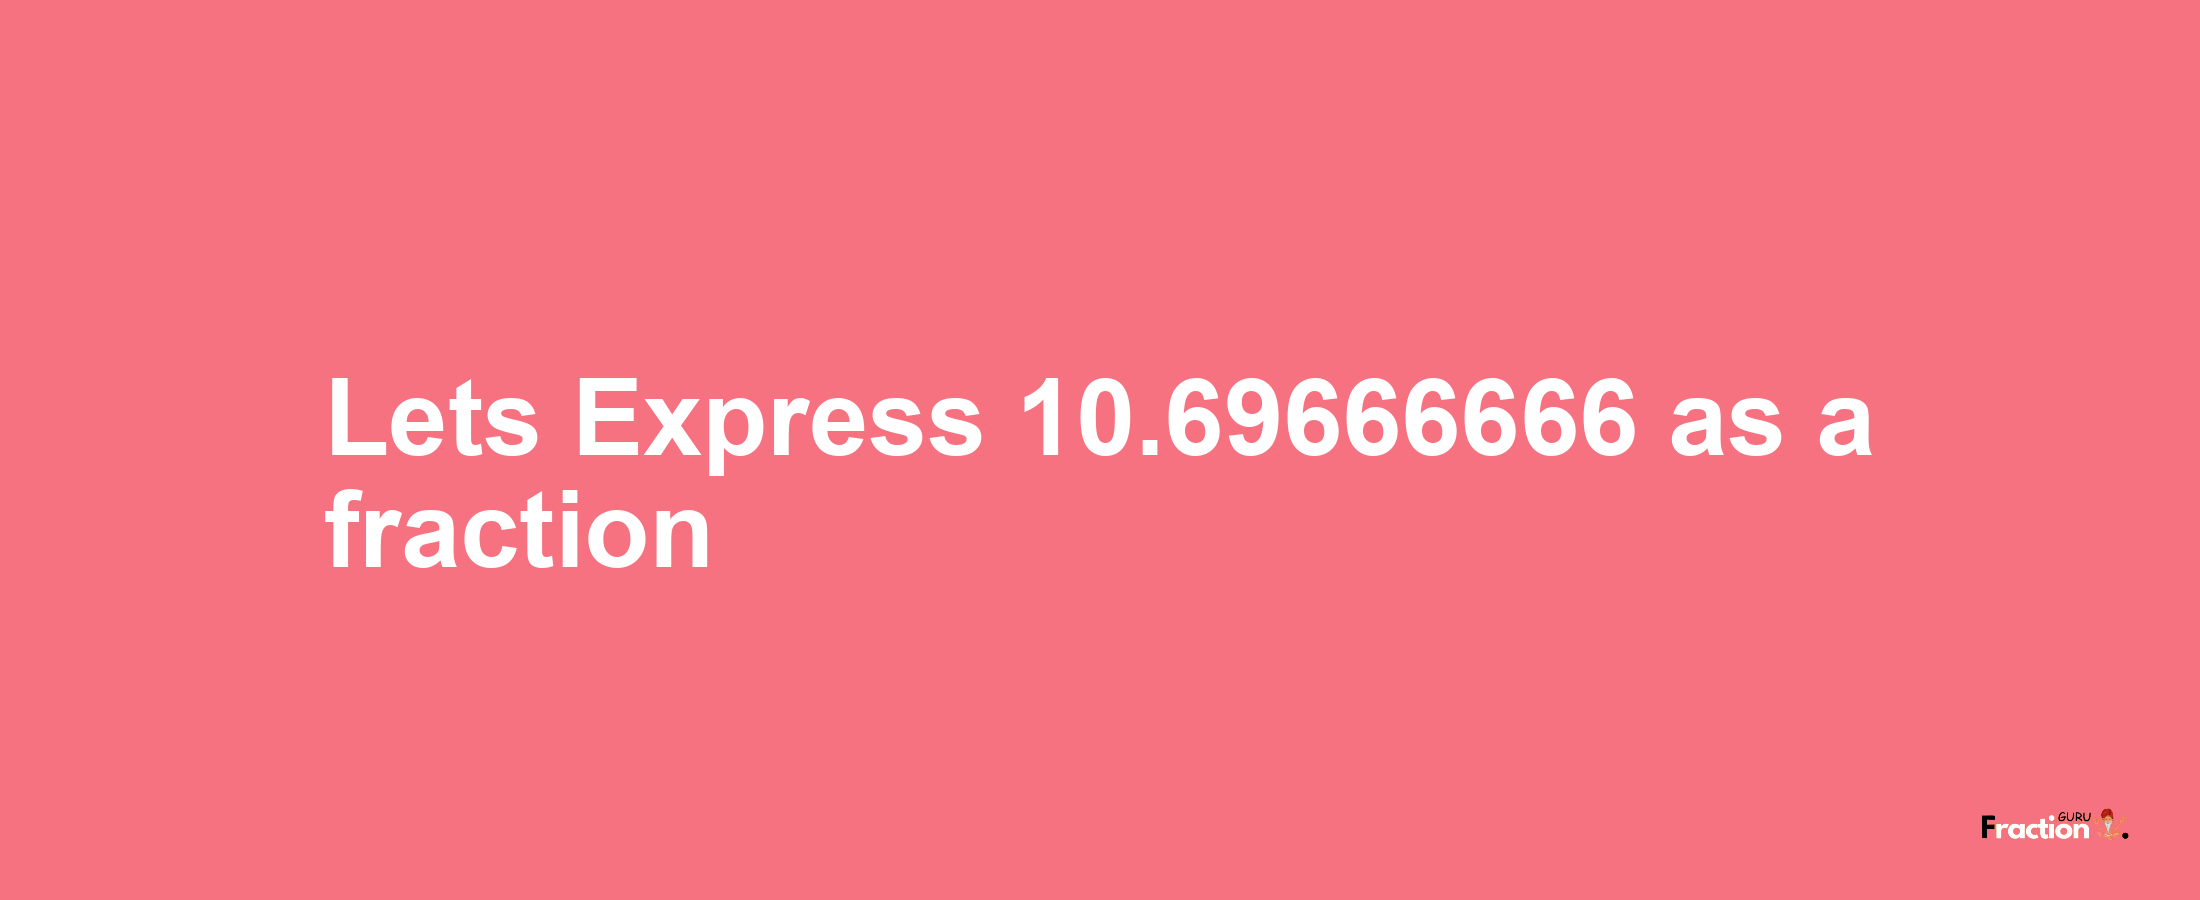 Lets Express 10.69666666 as afraction